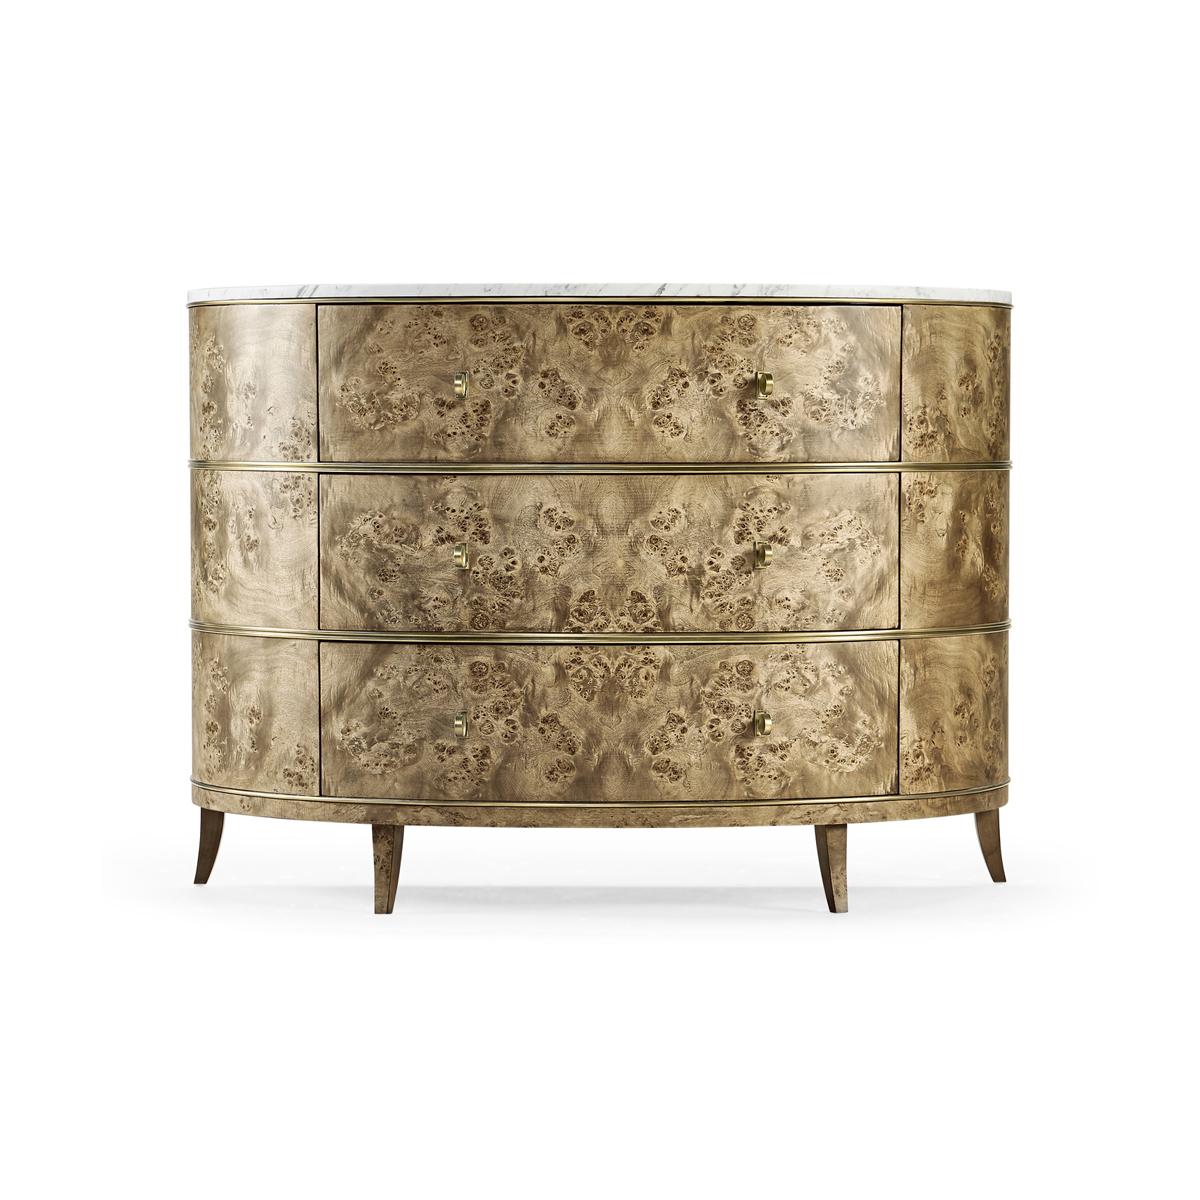 Modern French Marle top Burl Demi Lune dresser, constructed of hardwood and ash burl veneer under a light, transparent lacquer finish with an Italian white marble top. The brass hardware is acid-dipped and hand-rubbed to achieve a rich, natural